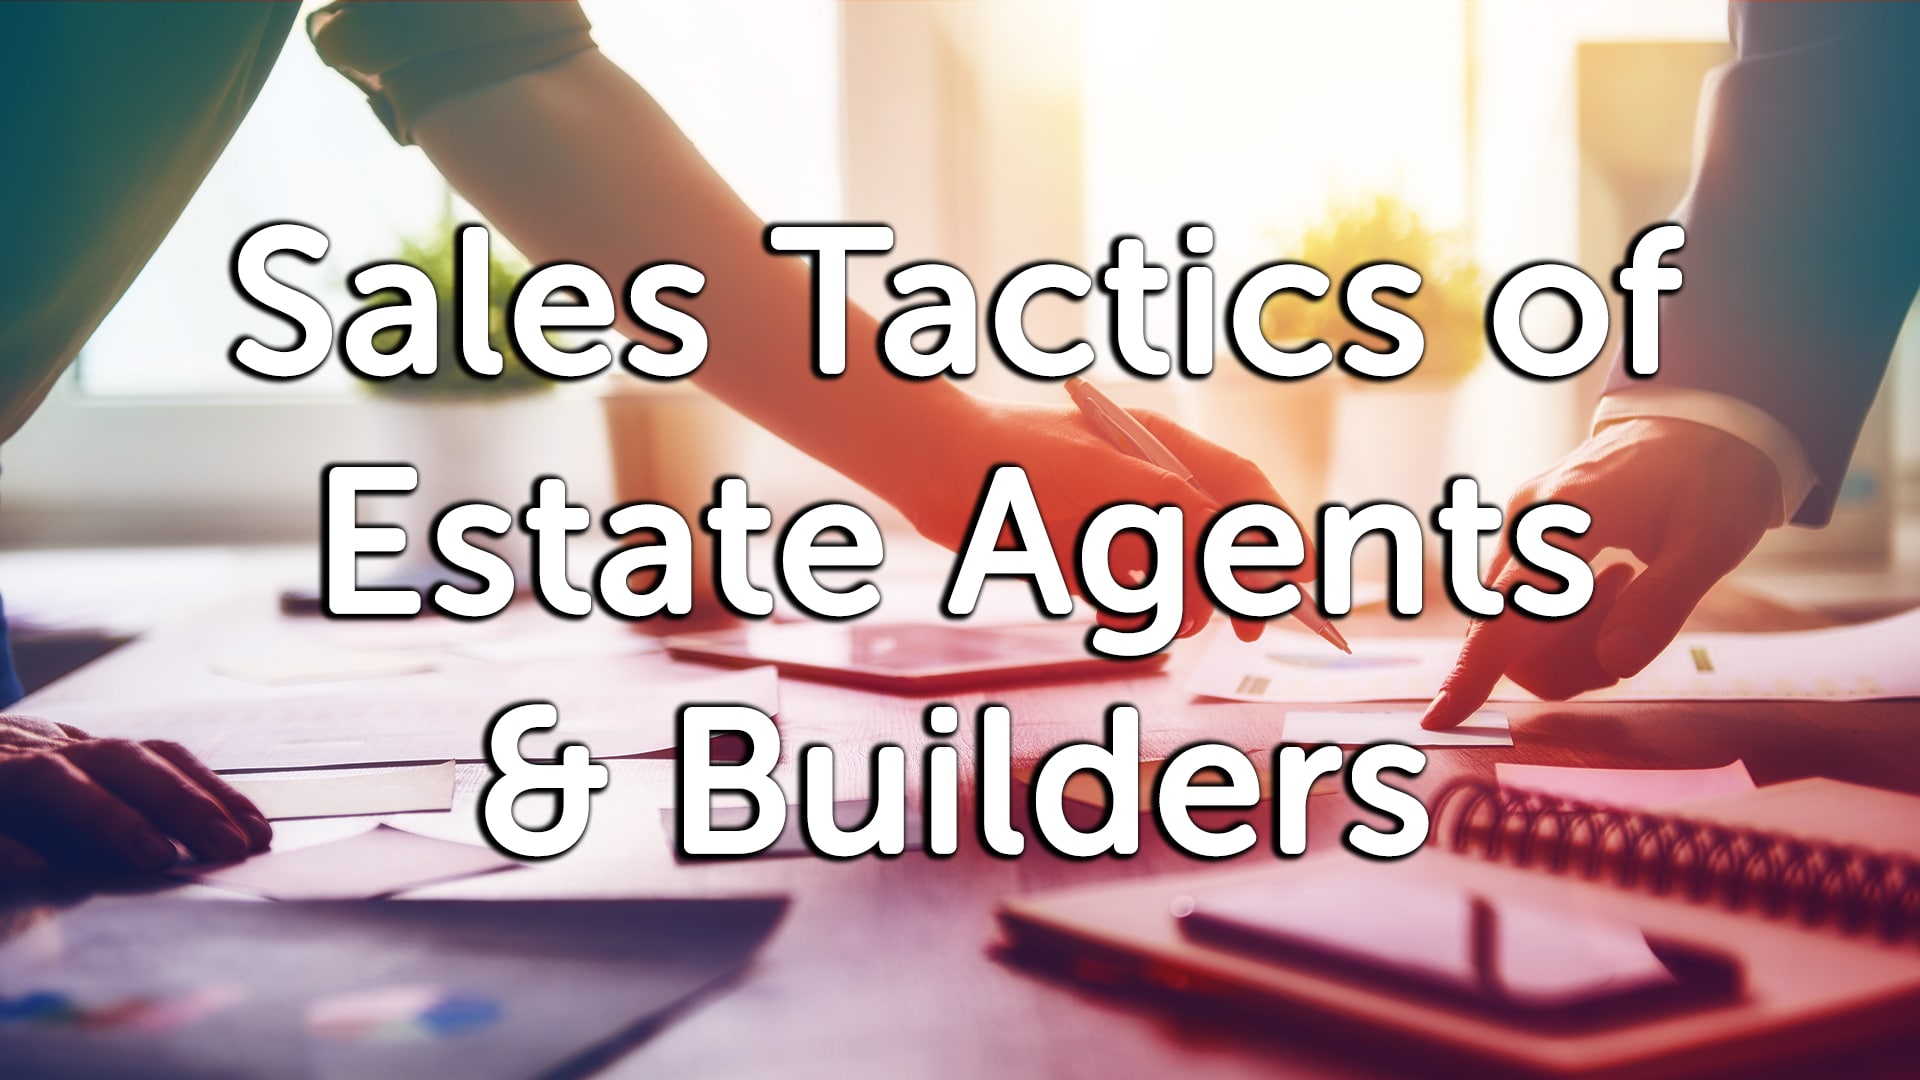 Should I Use My Estate Agent's In-House Mortgage Advisor?